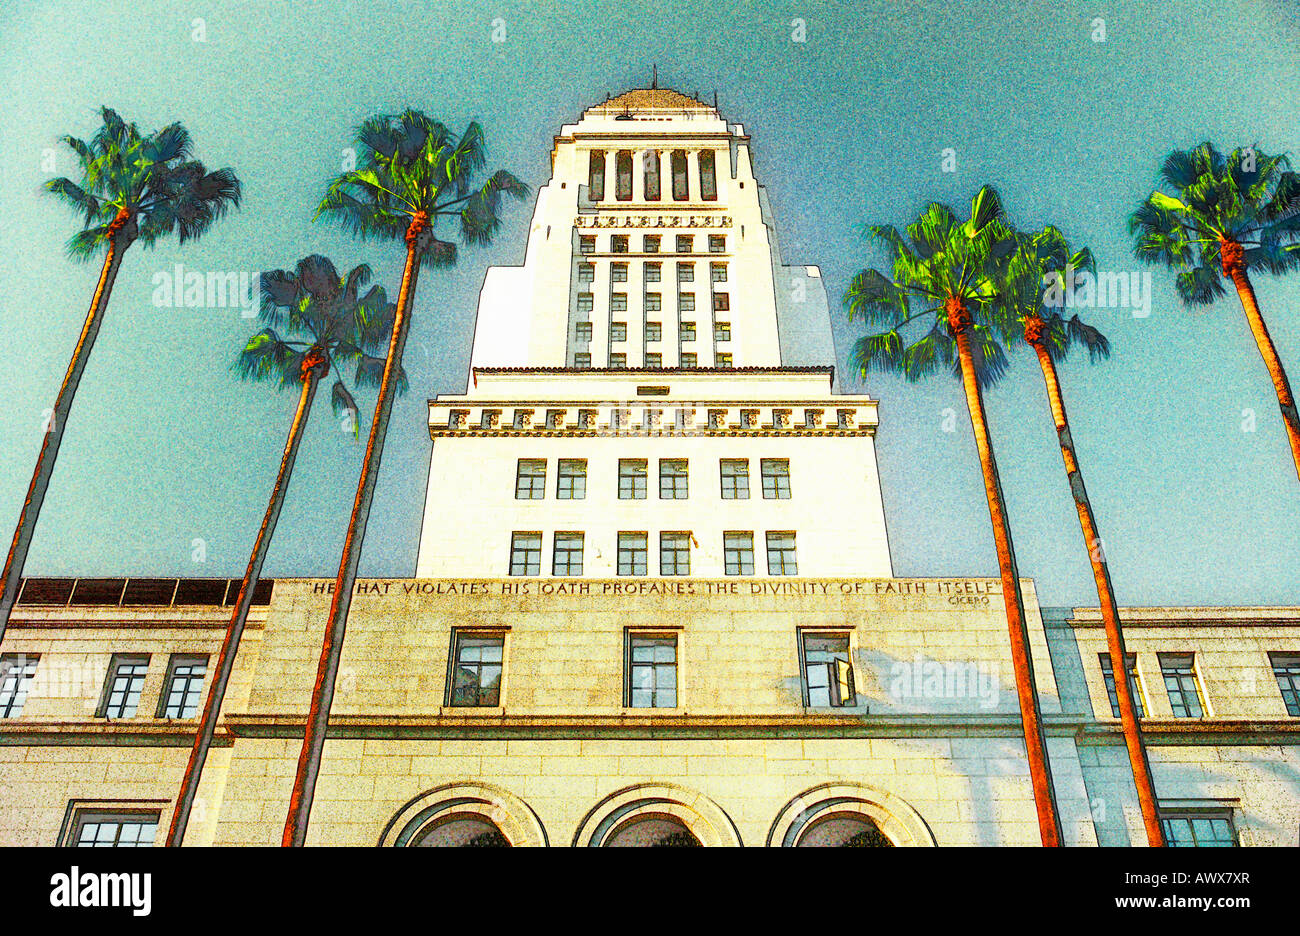 Digitally altered artistic view of City Hall, Los Angeles, CA Stock Photo